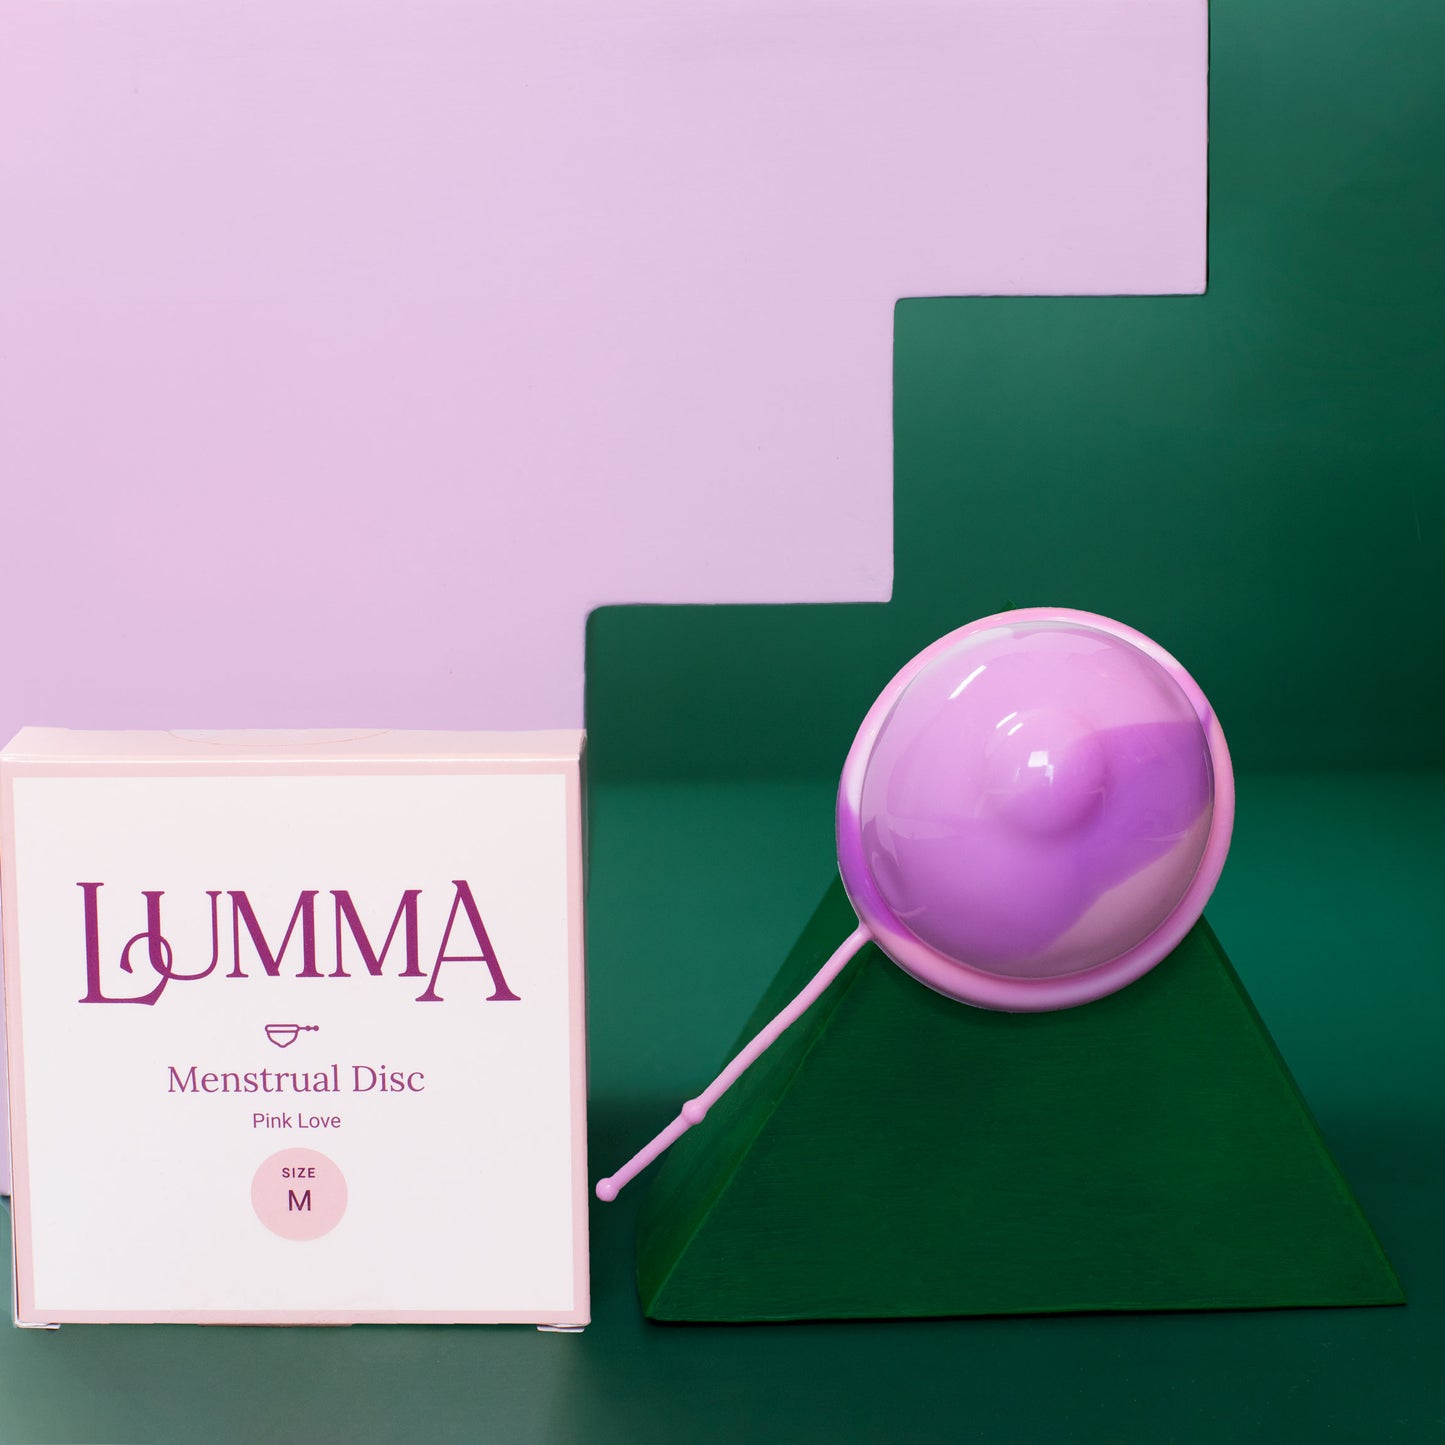 Lumma menstrual disc size Medium in pink love with packaging